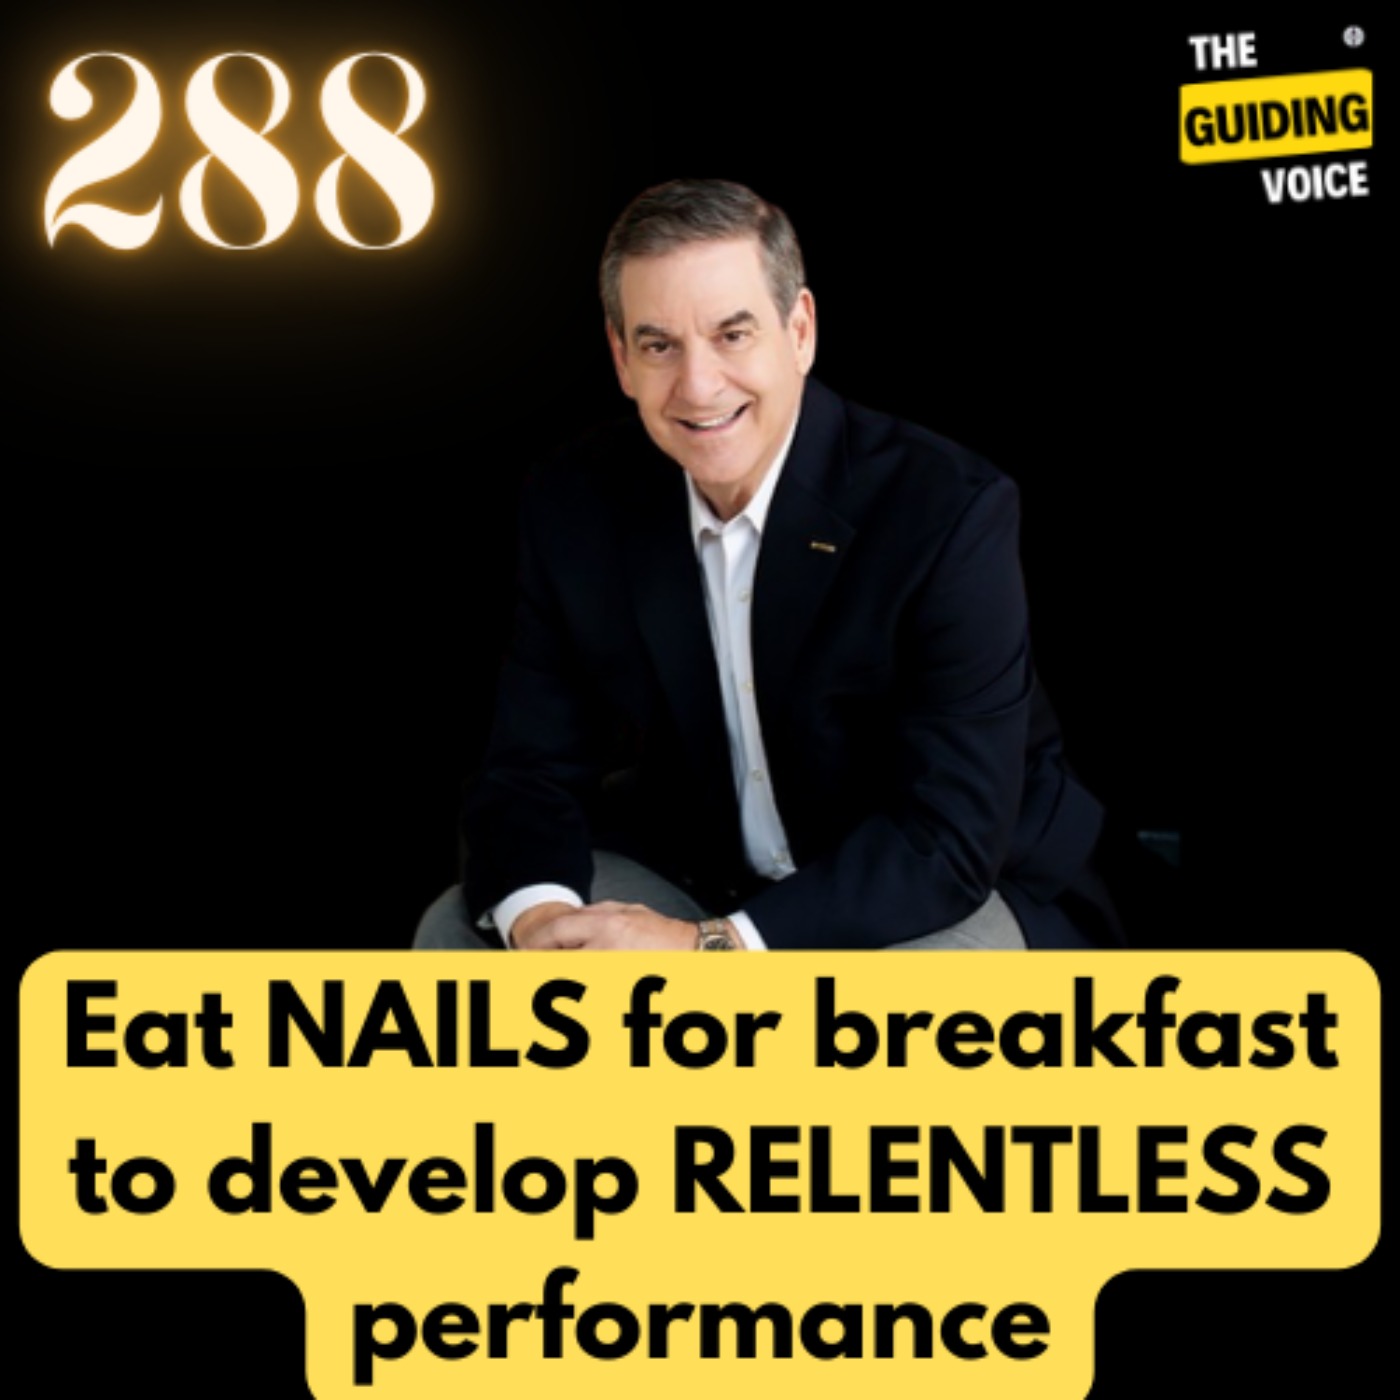 Eat nails for your breakfast to develop relentless performance | Steve Klein | #TGV288